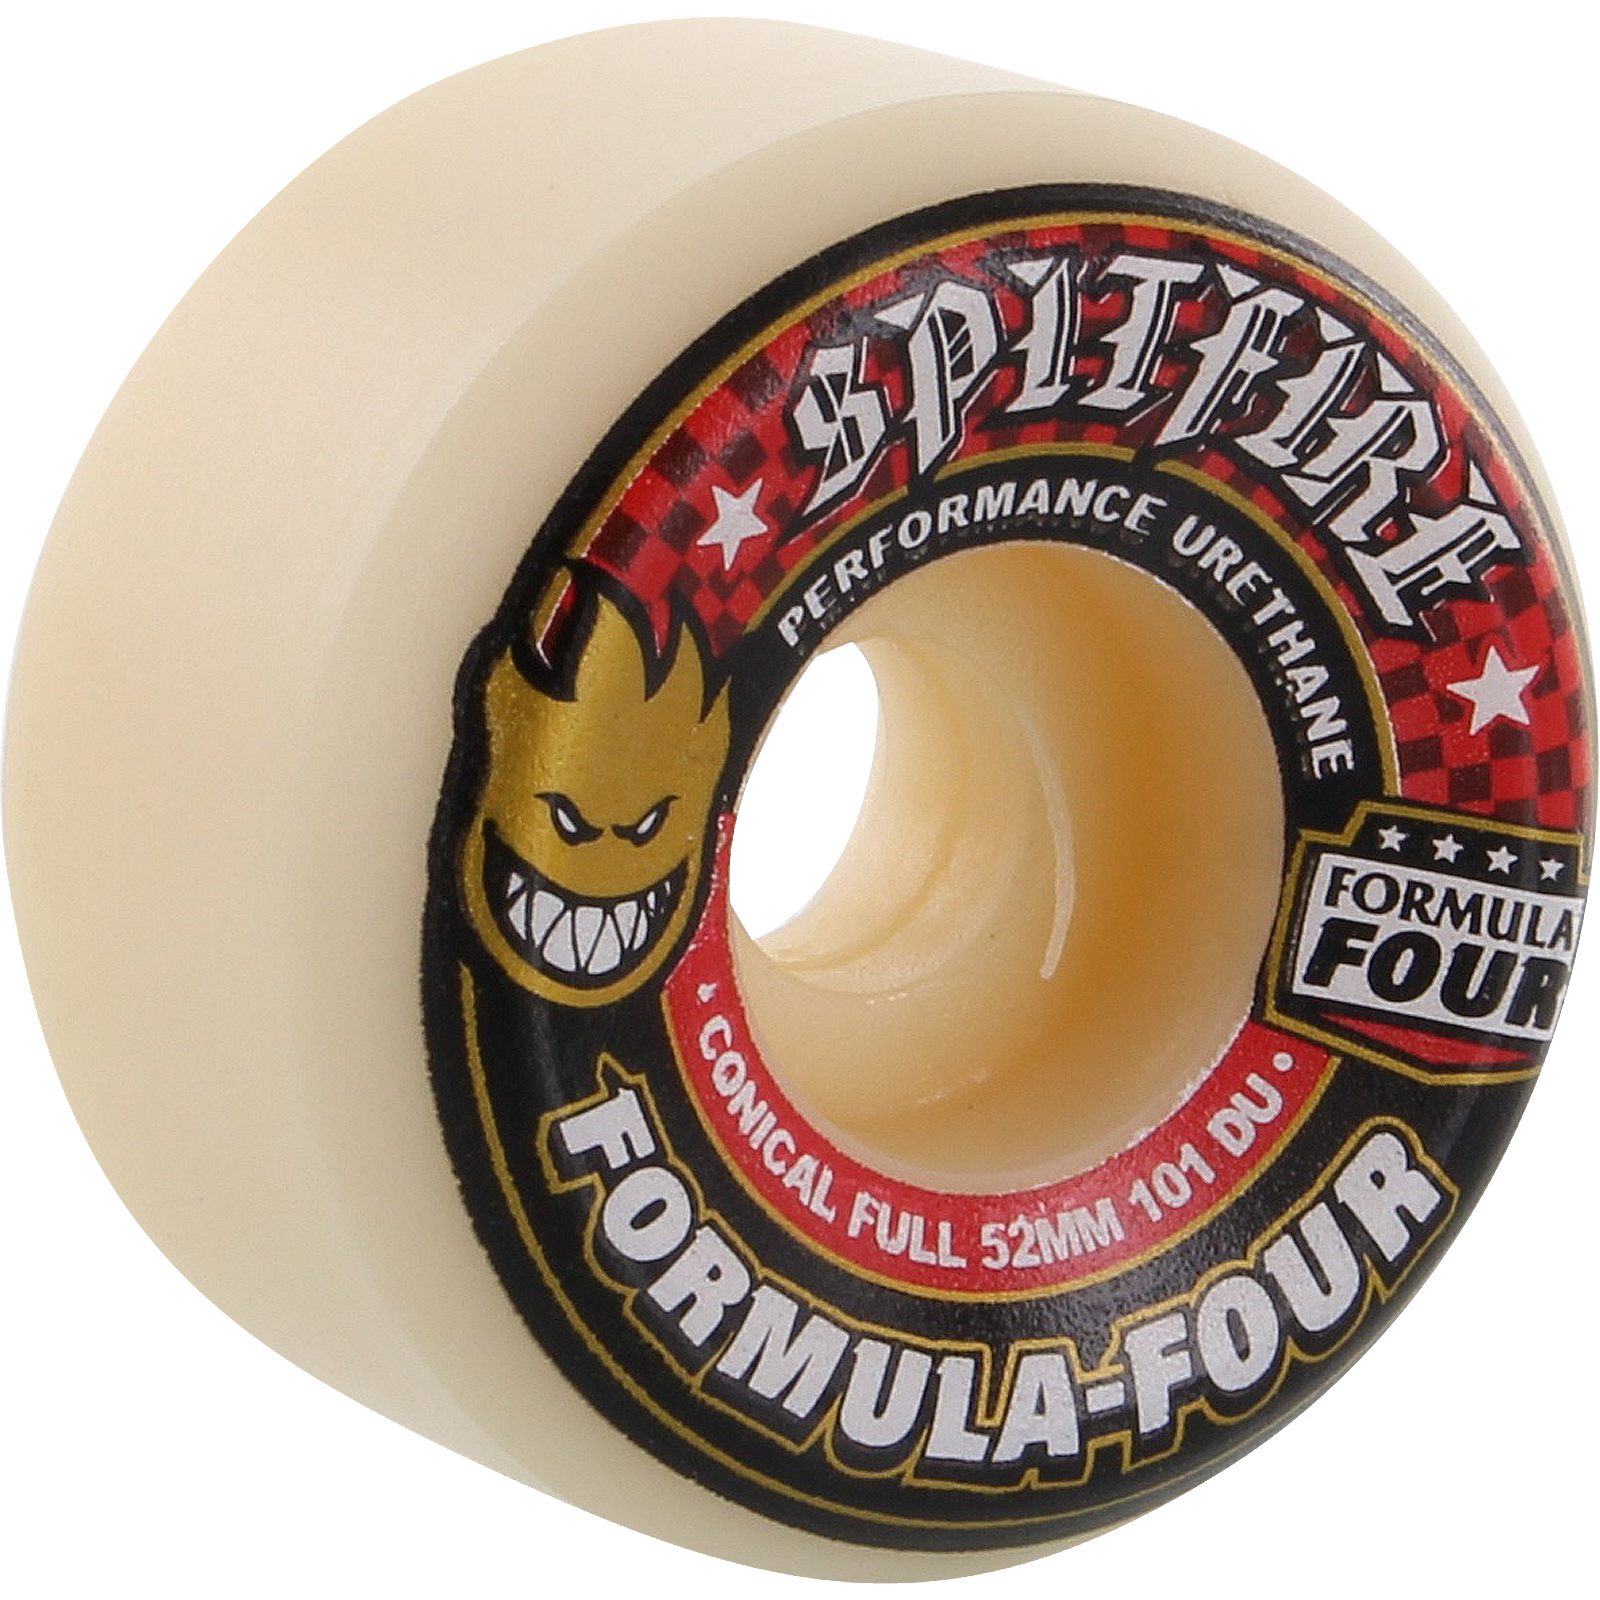 Spitfire F4 101a Conical Full 54mm White W/Red Skateboard Wheels (Set of 4)